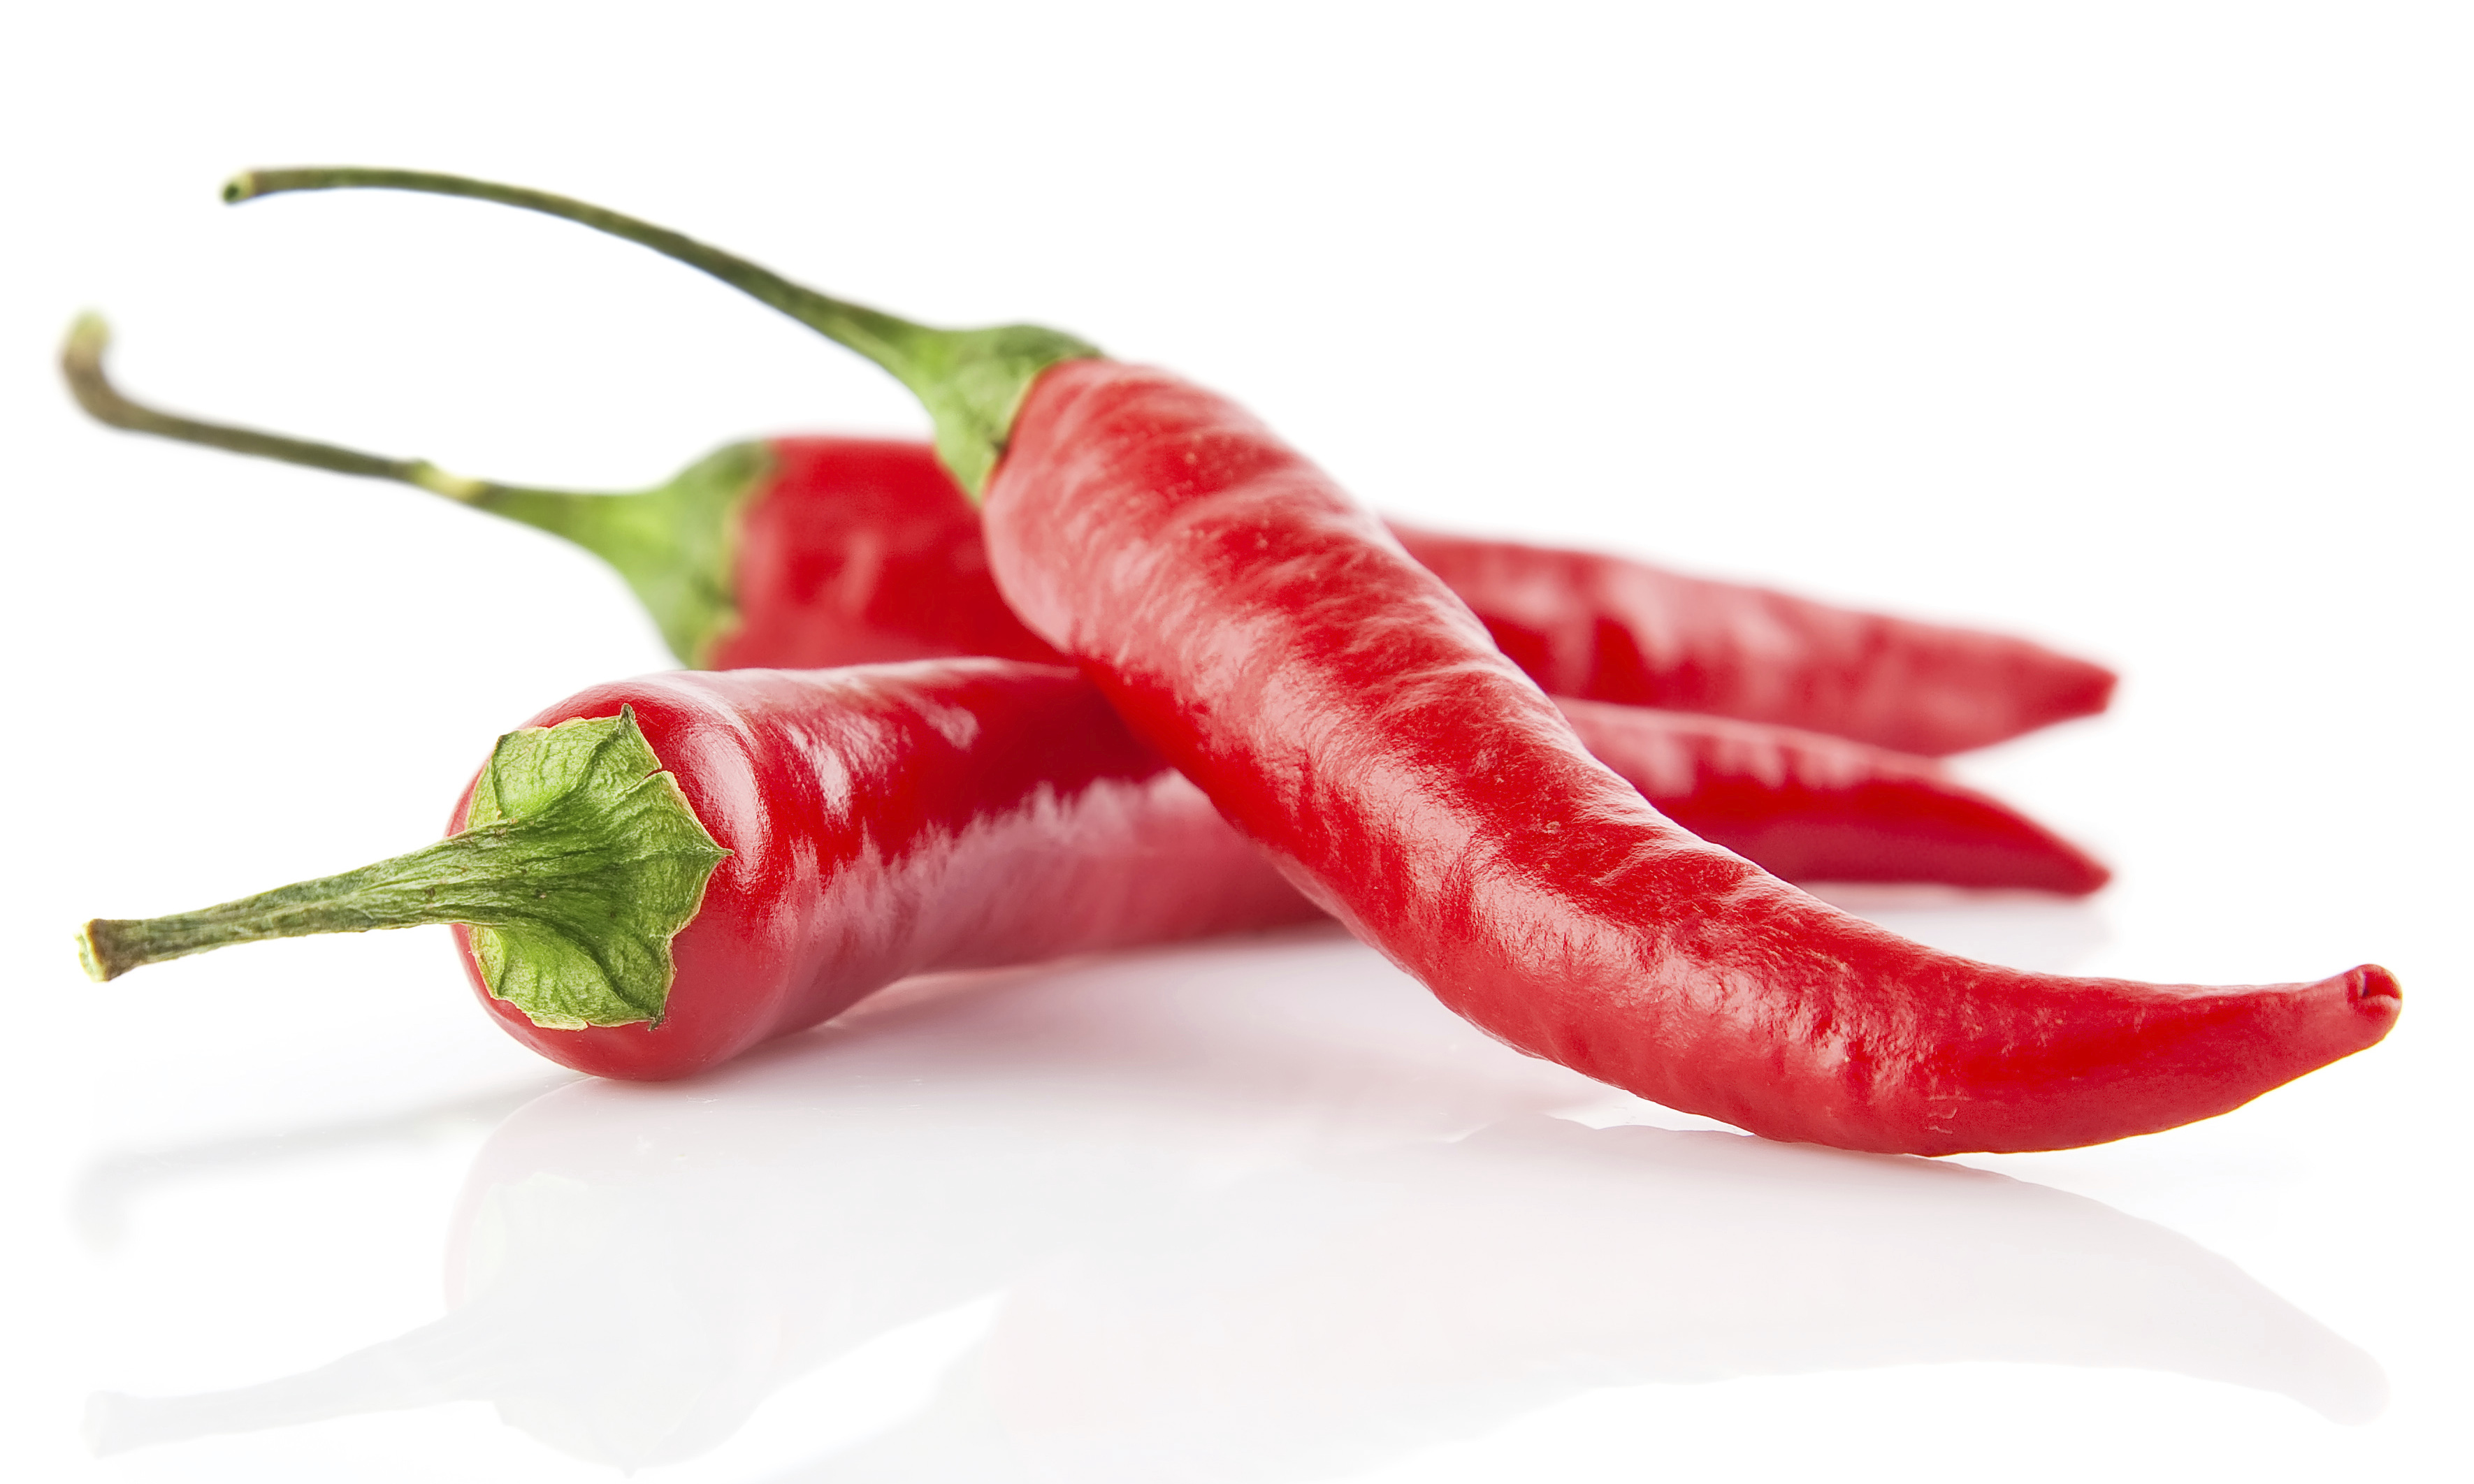 Good for weight control and cancer prevention.  Cayenne and other types of chili peppers are loaded with capsaicins, a cancer-fighting compound that is especially effective at killing prostate cancer cells. Capsaicins also regulate the appetite and stimulate the metabolism, leading to greater weight control. 